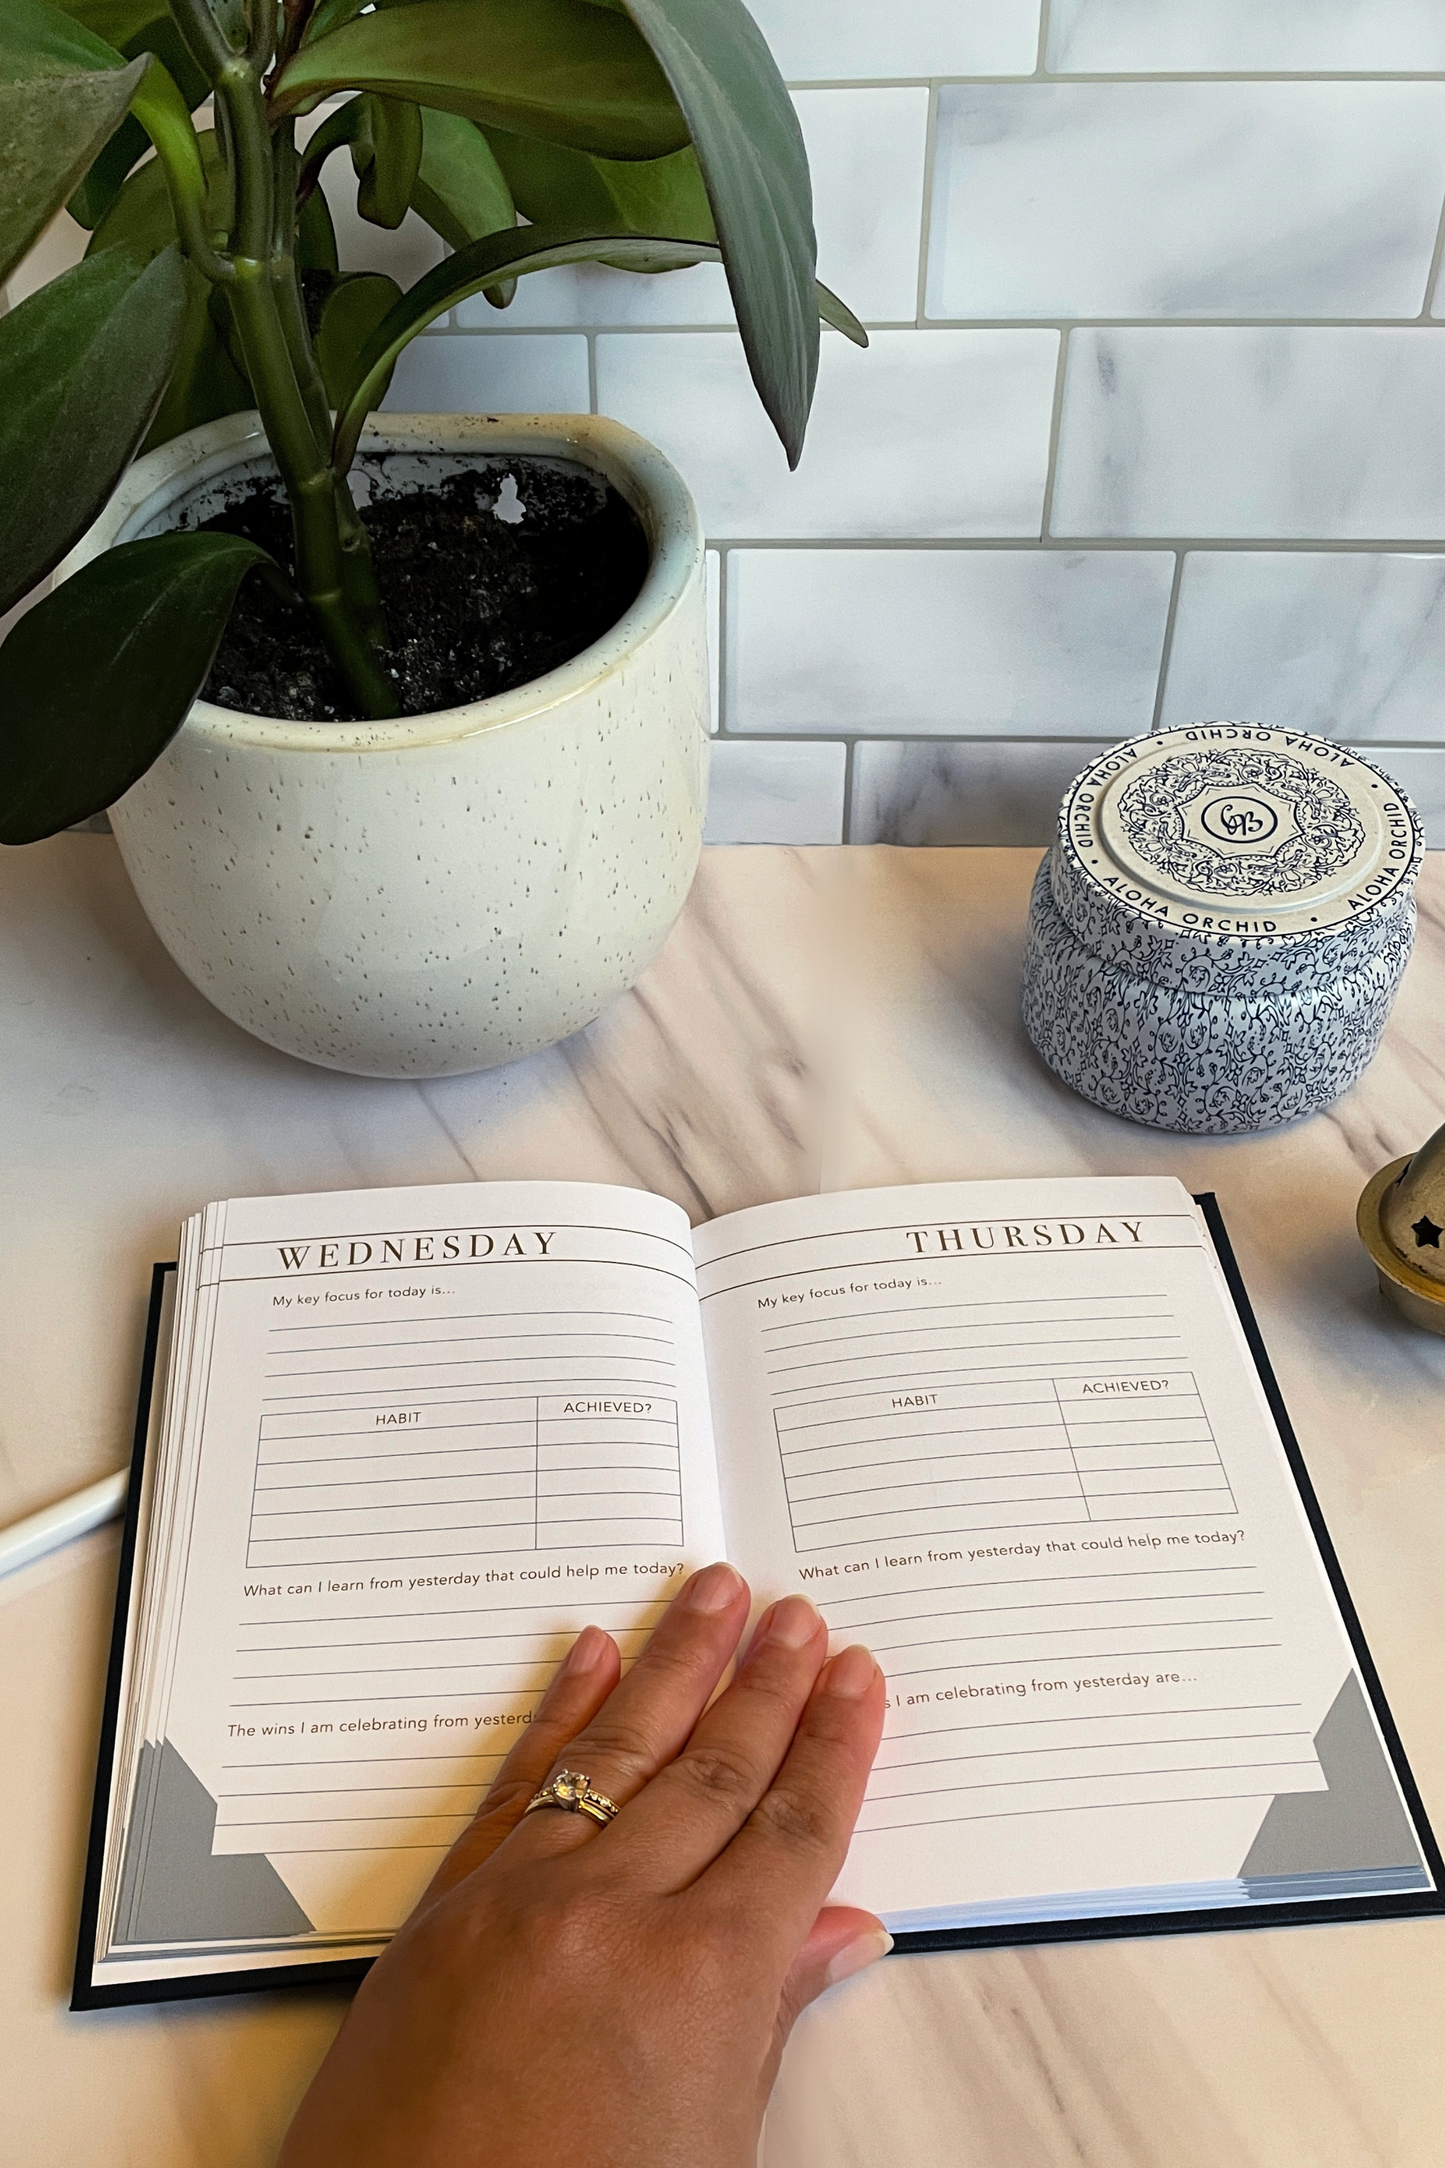 Habit Notes: Daily Habit Tracking Journal